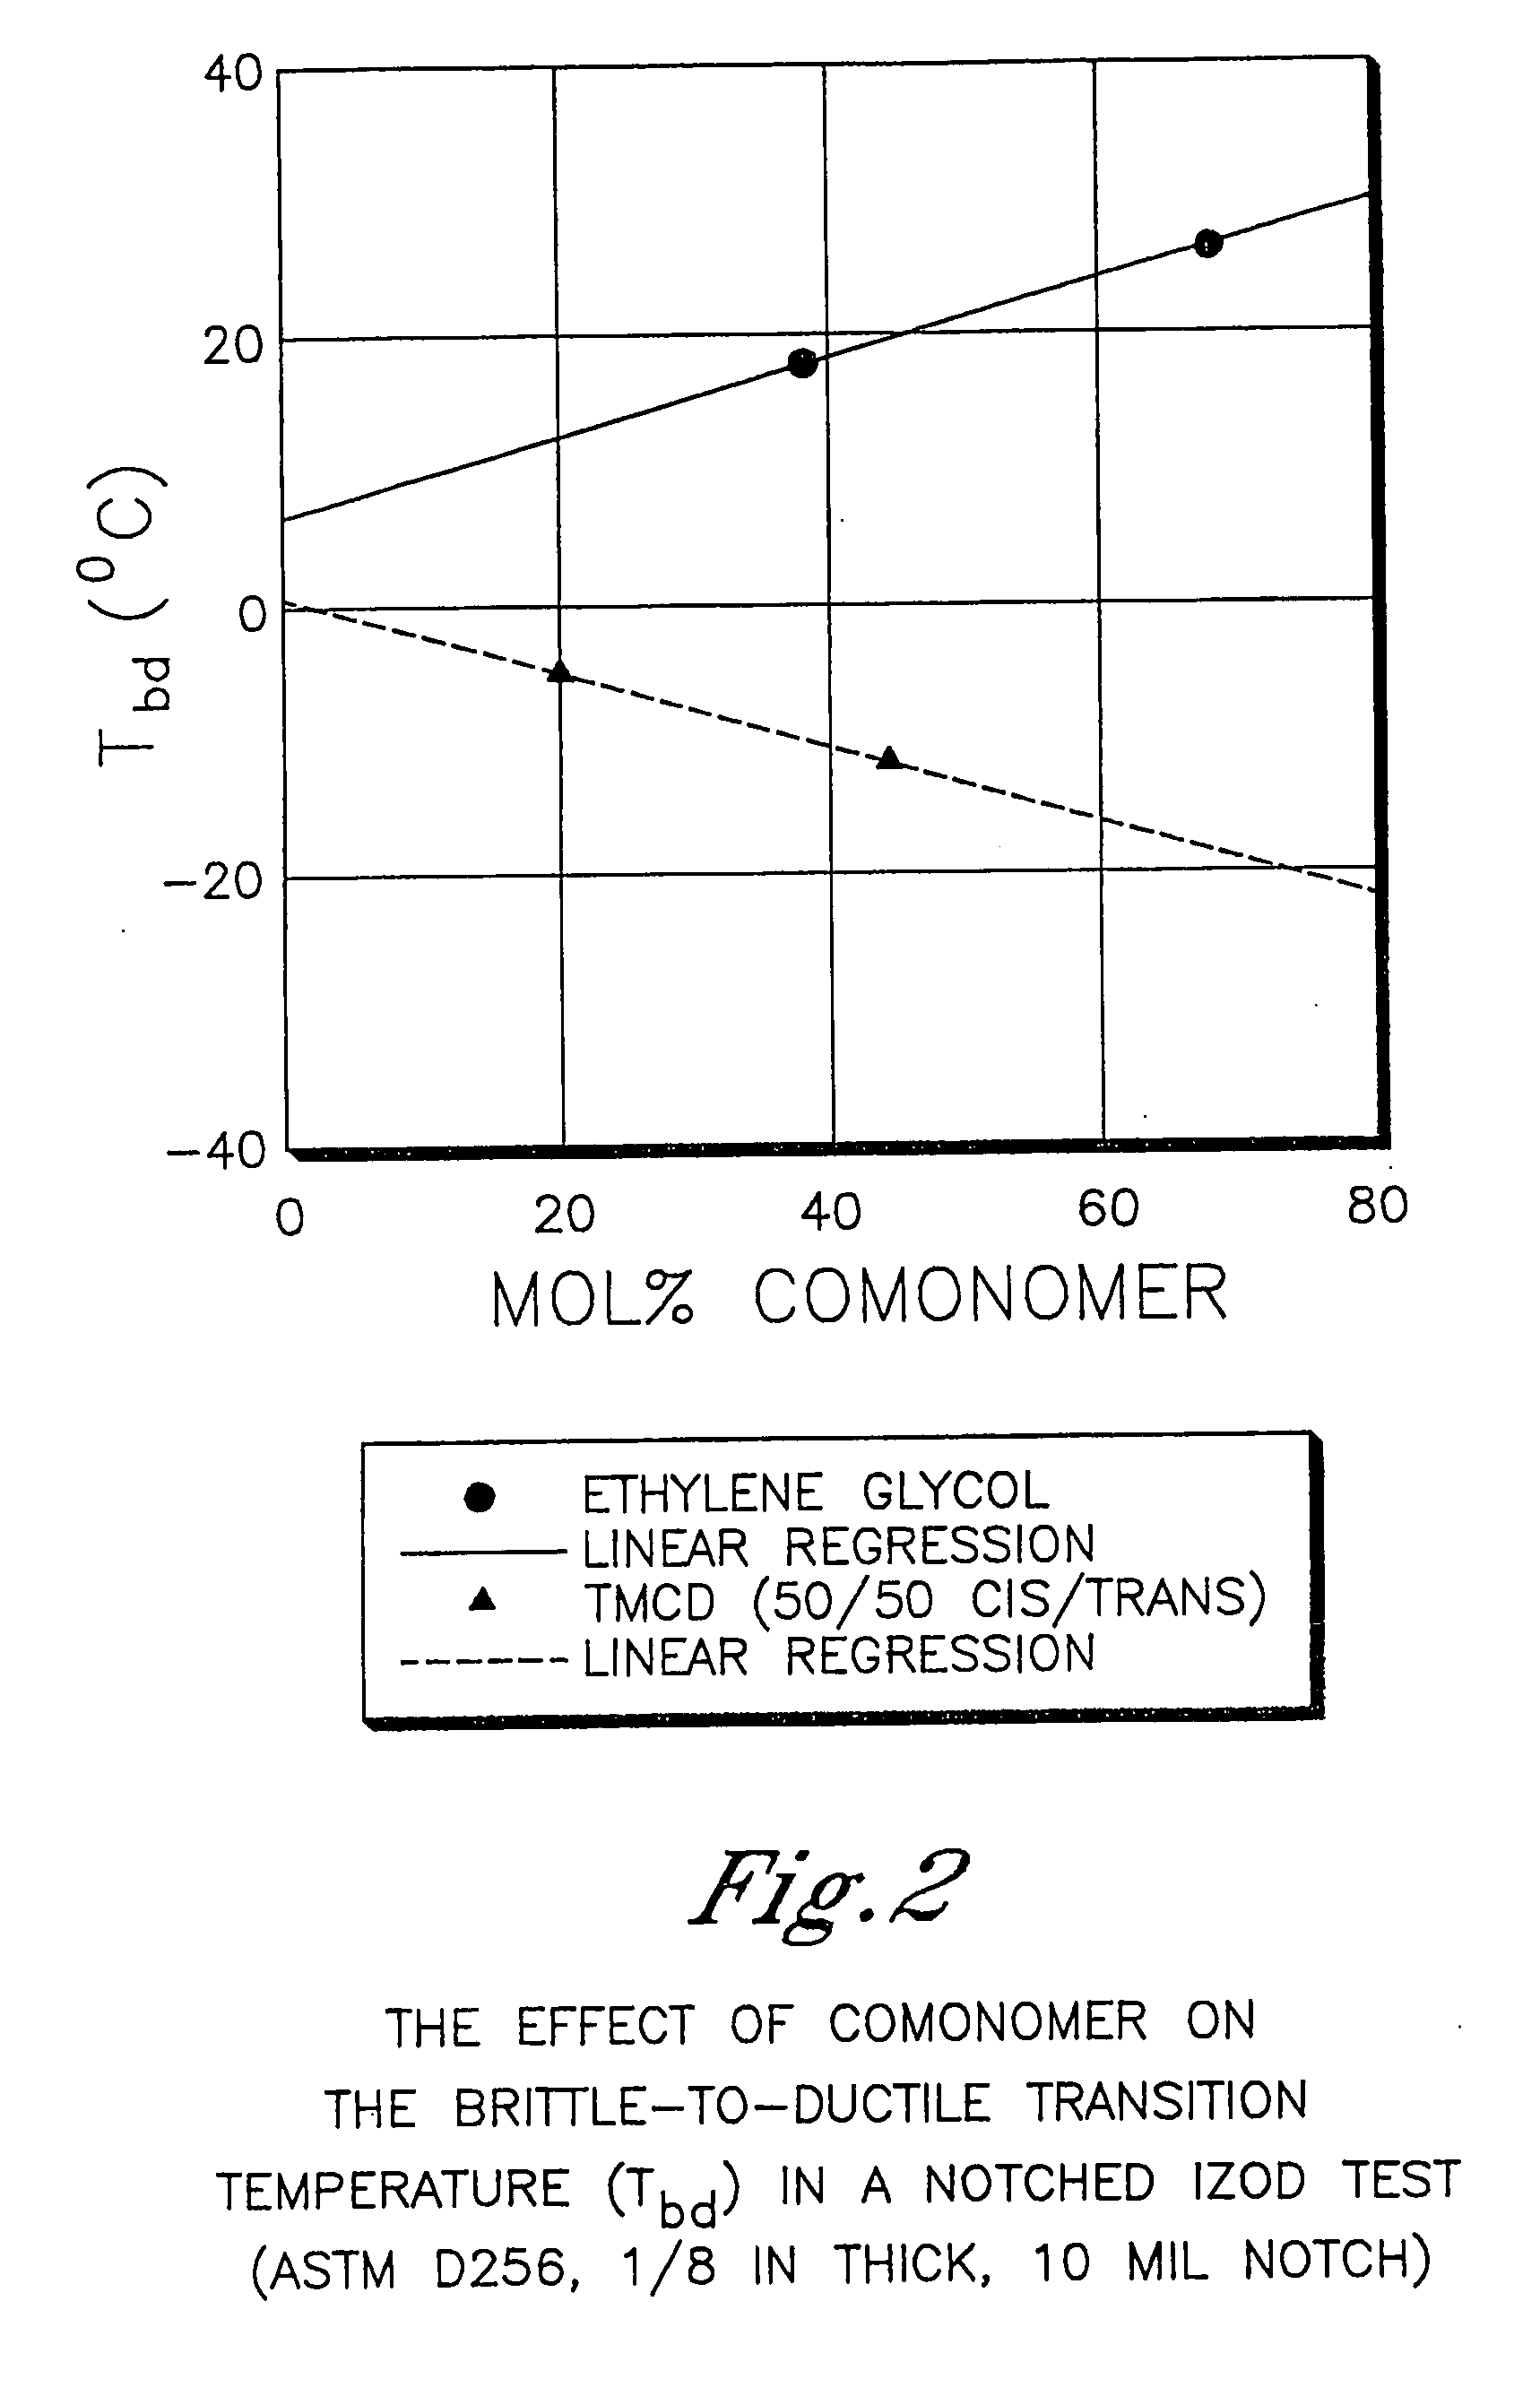 Appliance parts comprising polyester compositions formed from 2,2,4,4-tetramethyl-1,3-cyclobutanediol and 1,4-cyclohexanedimethanol